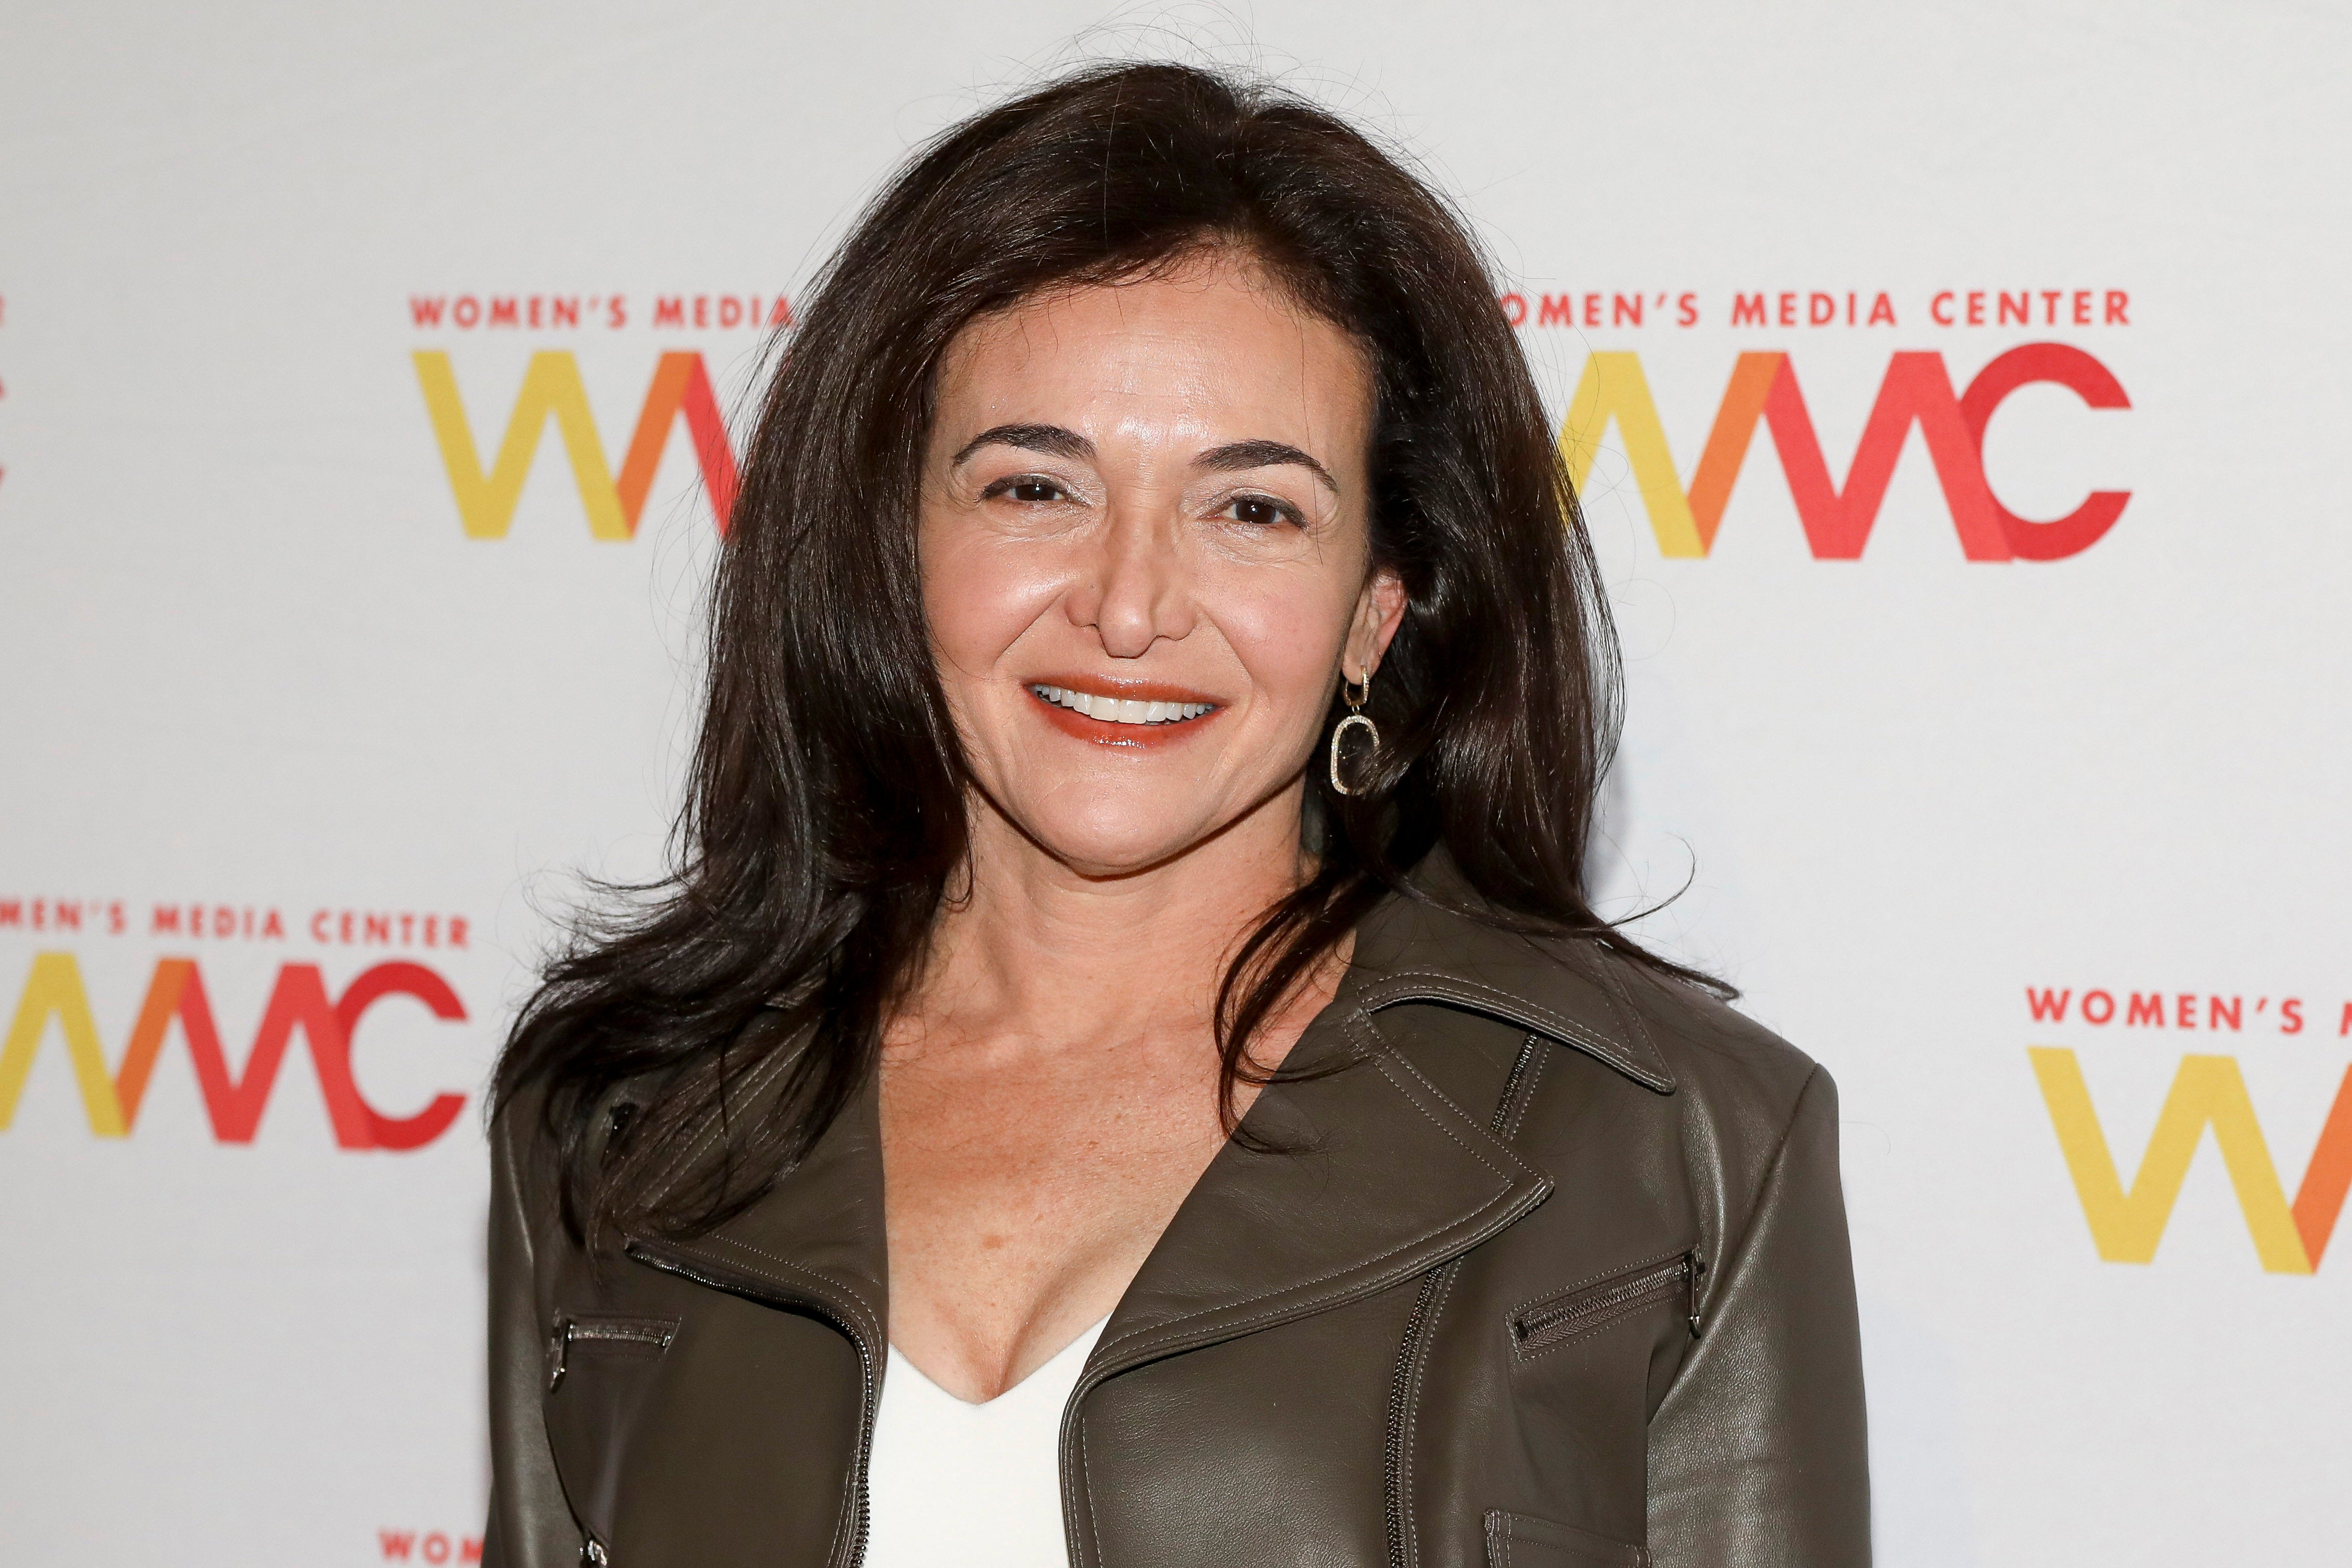 Sheryl Sandberg was an undergraduate student at Harvard University when Claudia Goldin became the first female tenured economics professor at the institution